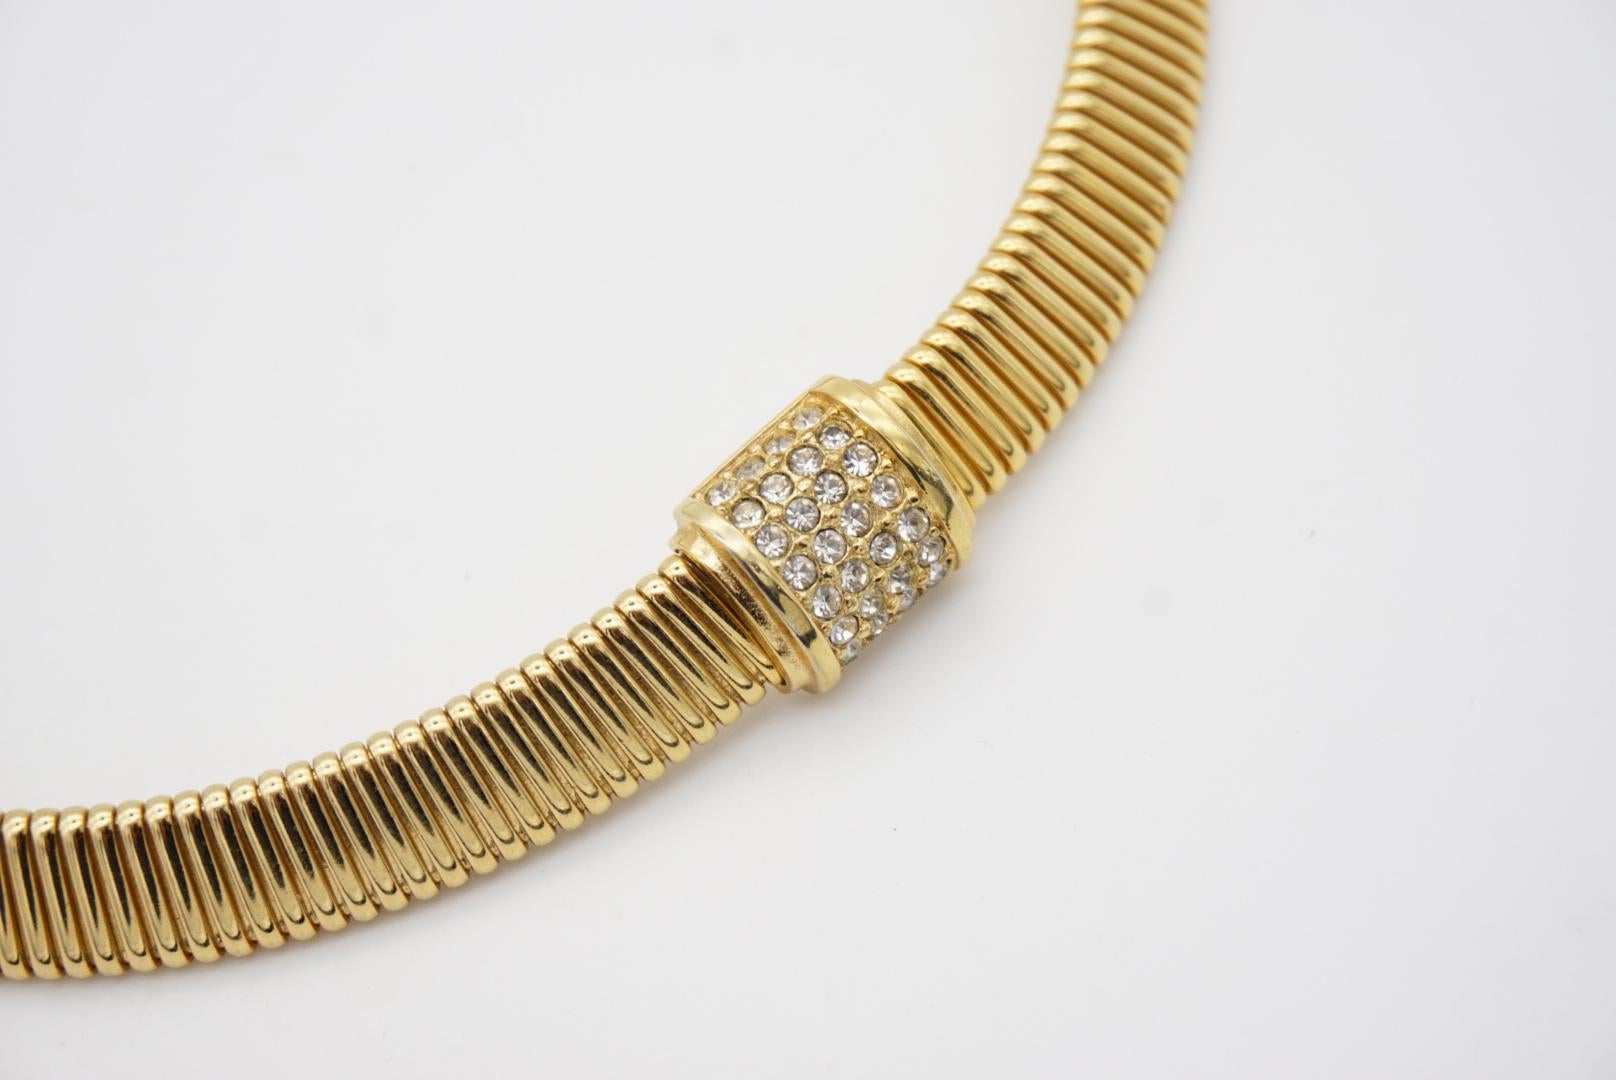 Christian Dior Vintage 1980s Omega Collar Shining Crystals Square Gold Necklace For Sale 3